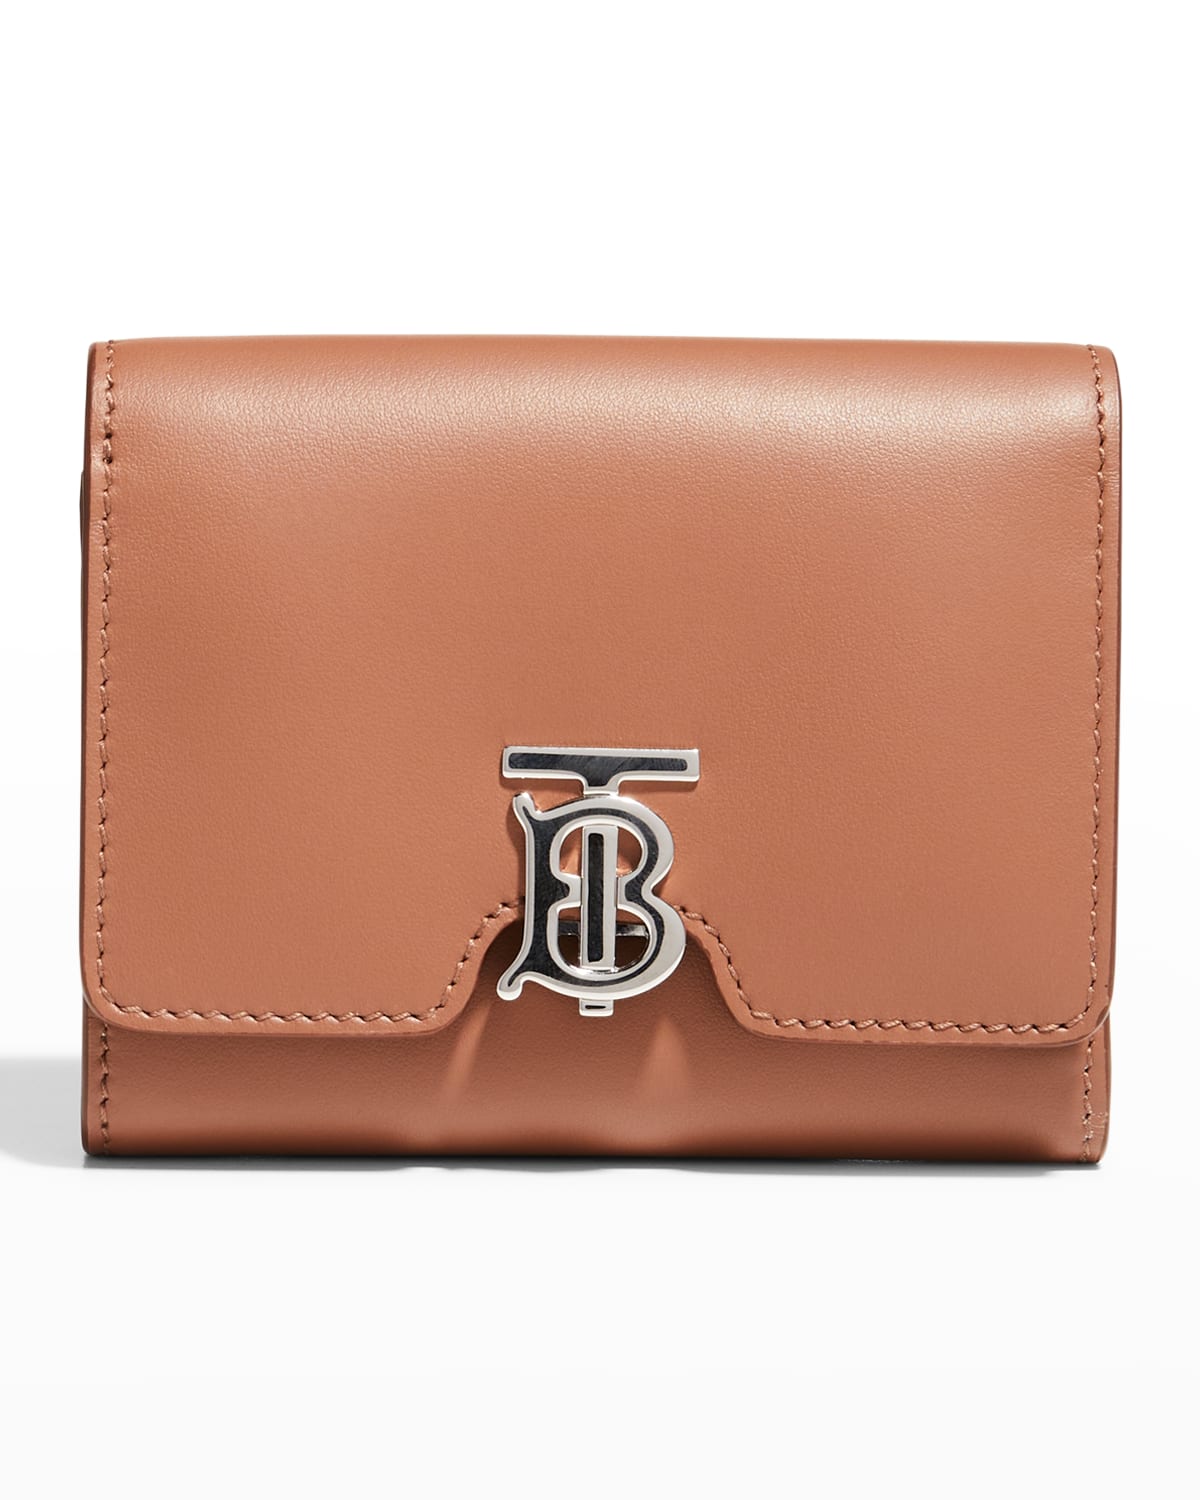 TB Trifold Compact Wallet